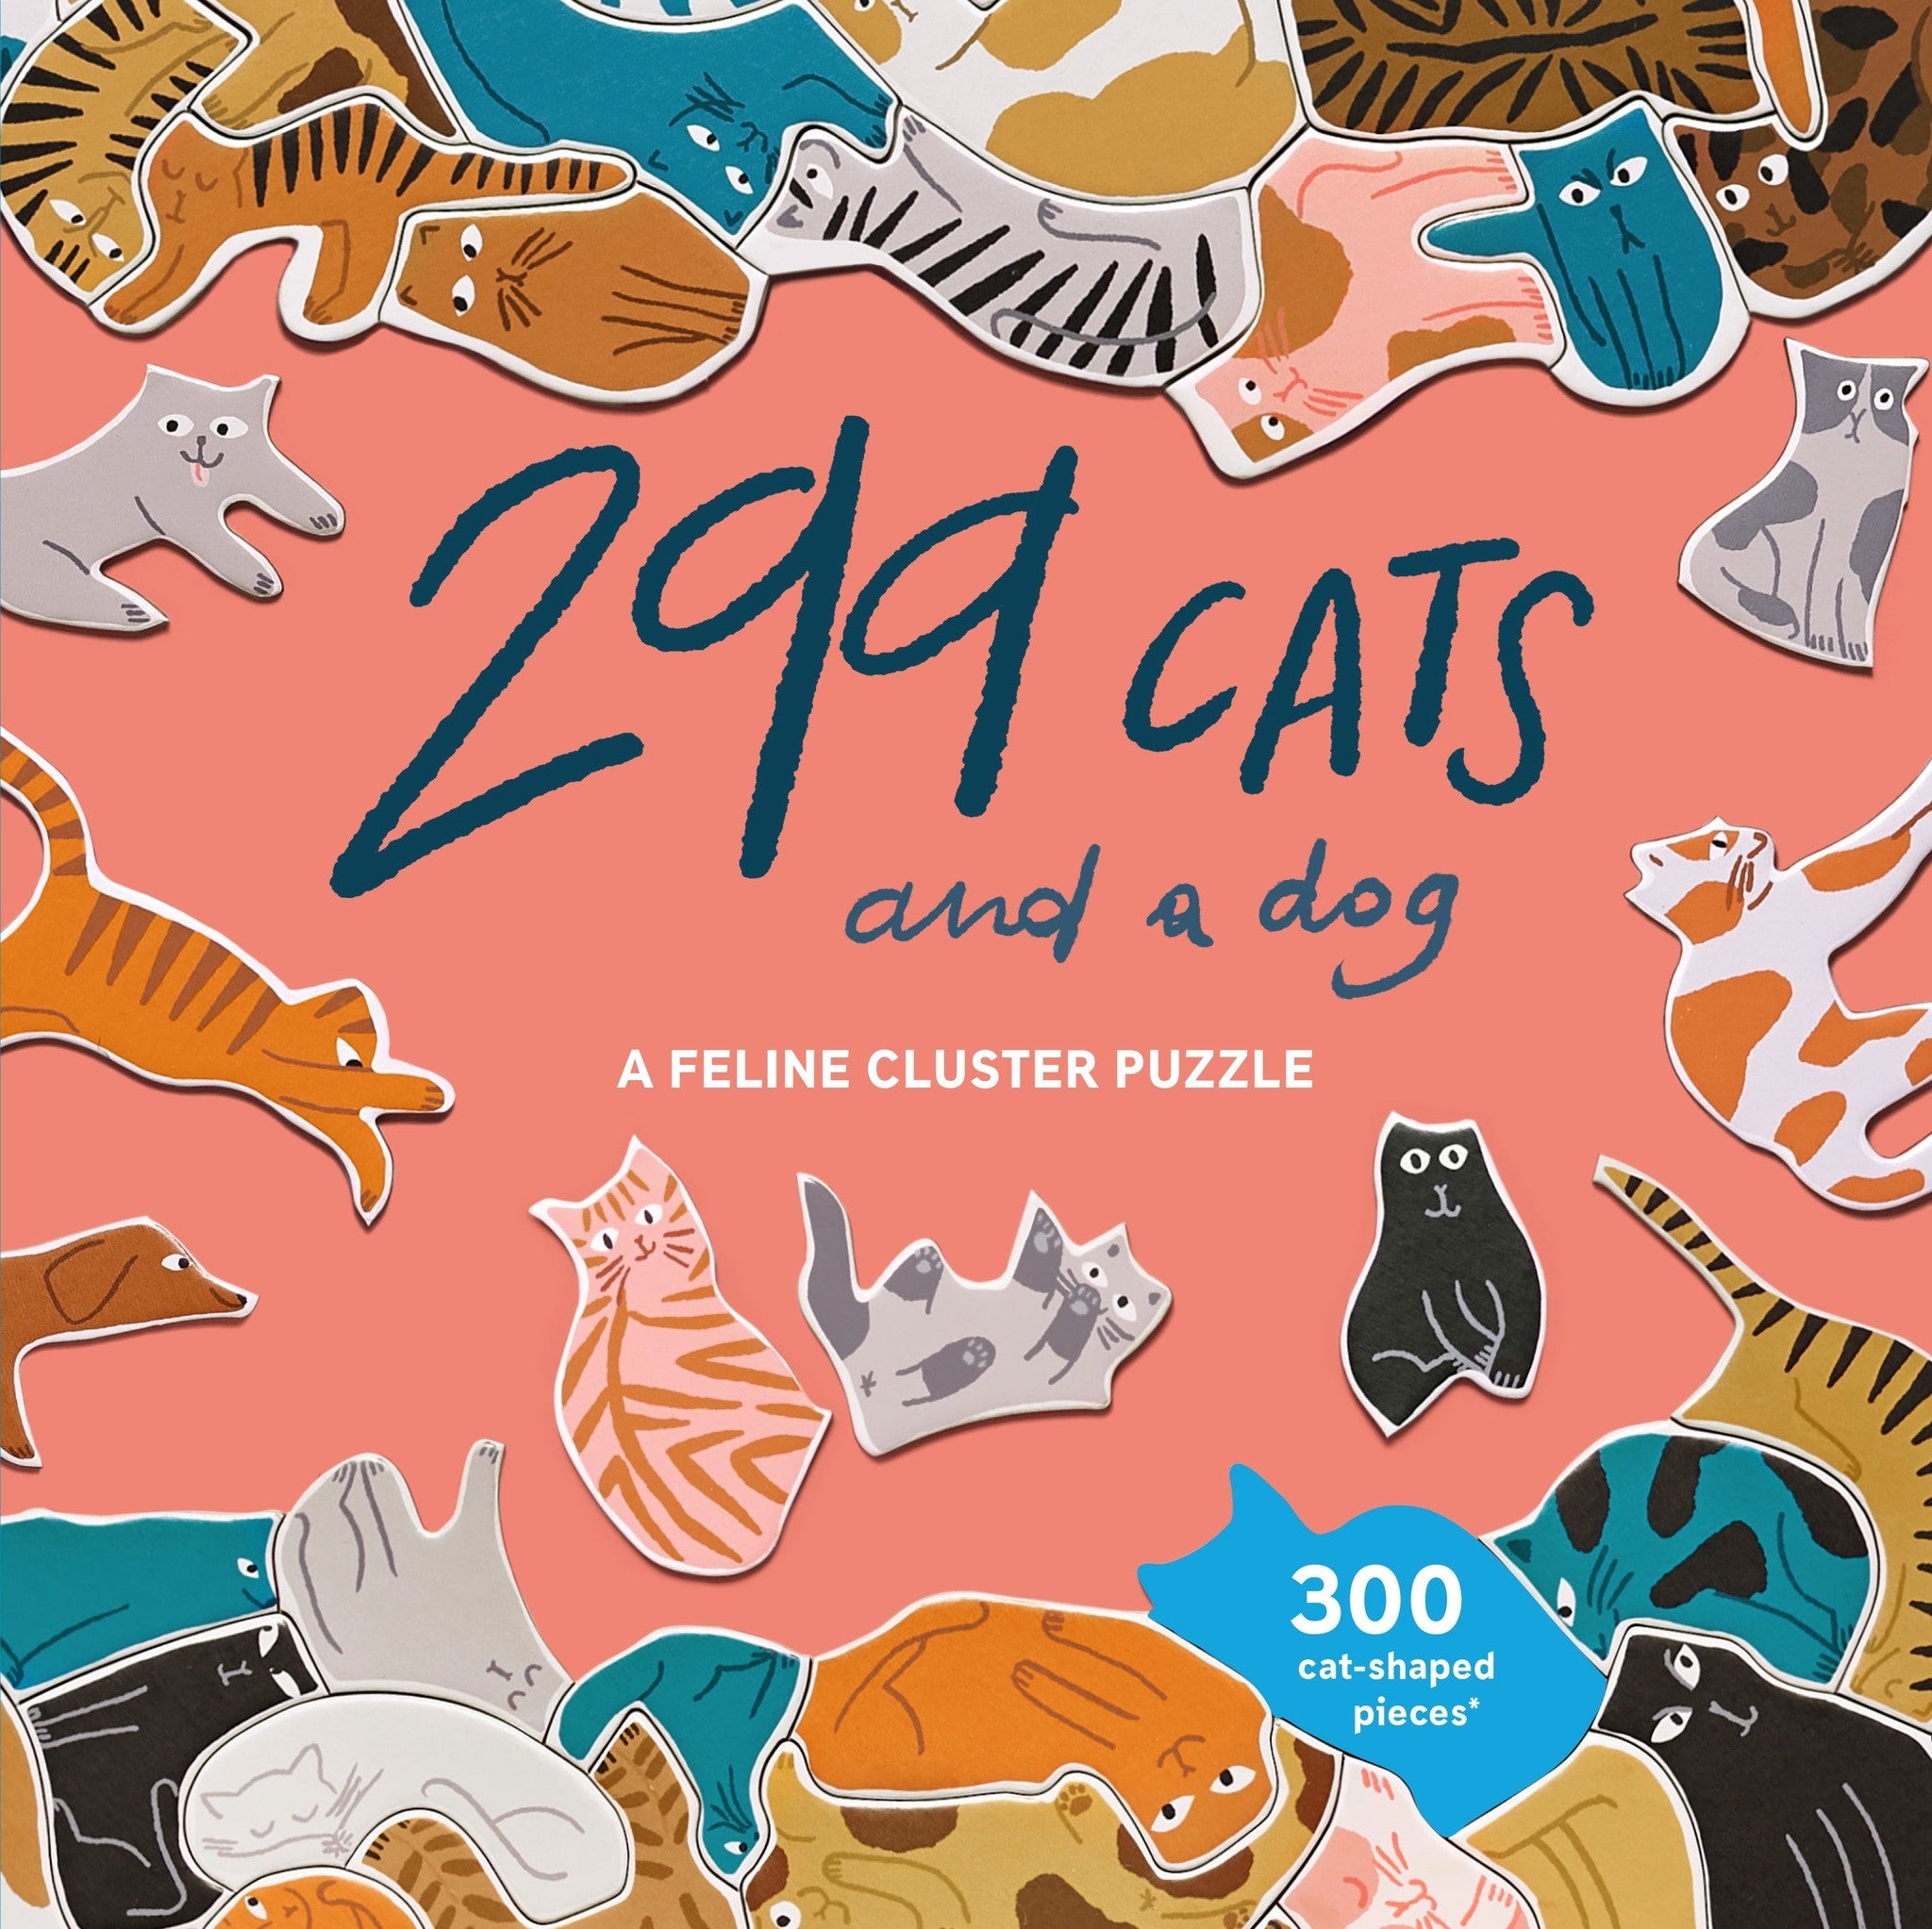 299 Cats and a Dog - A Feline Cluster Puzzle